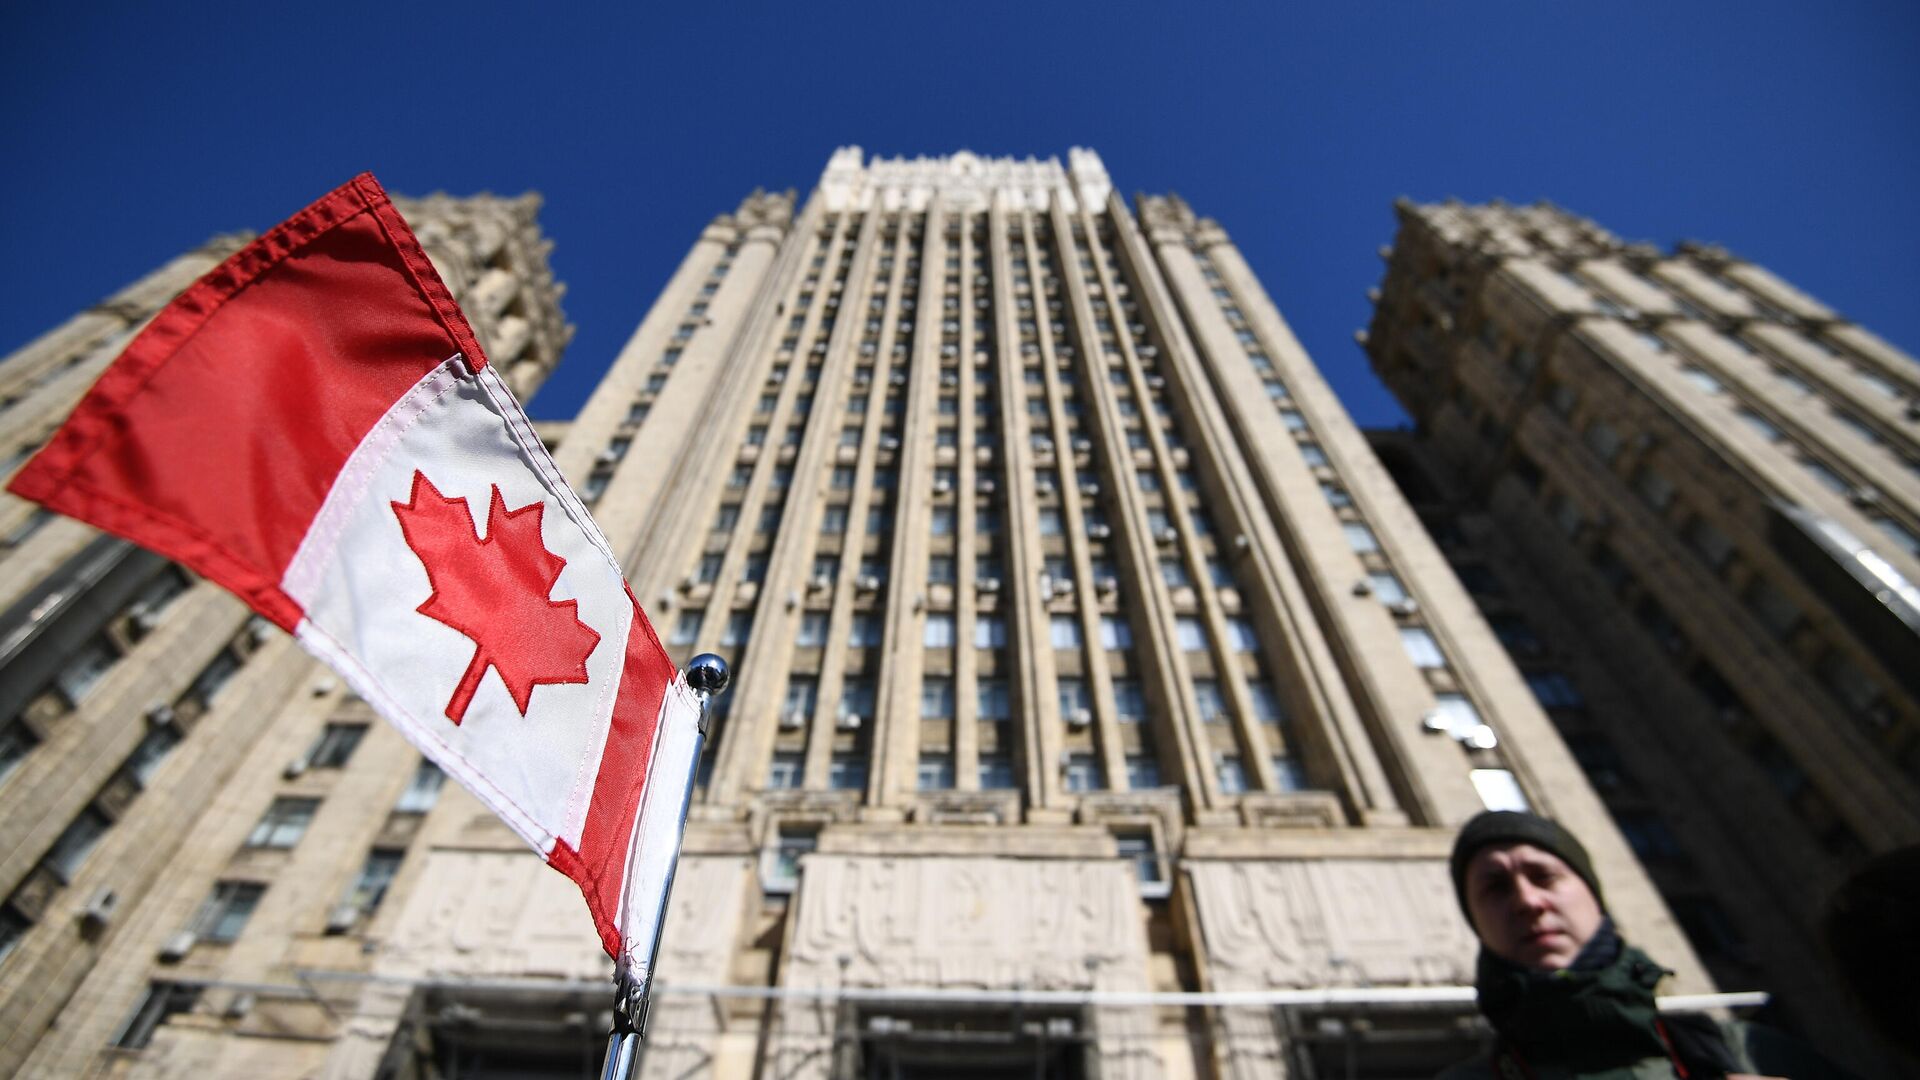 The flag of Canada on the car of the embassy in front of the building of the Russian Ministry of Foreign Affairs - Sputnik International, 1920, 24.02.2022